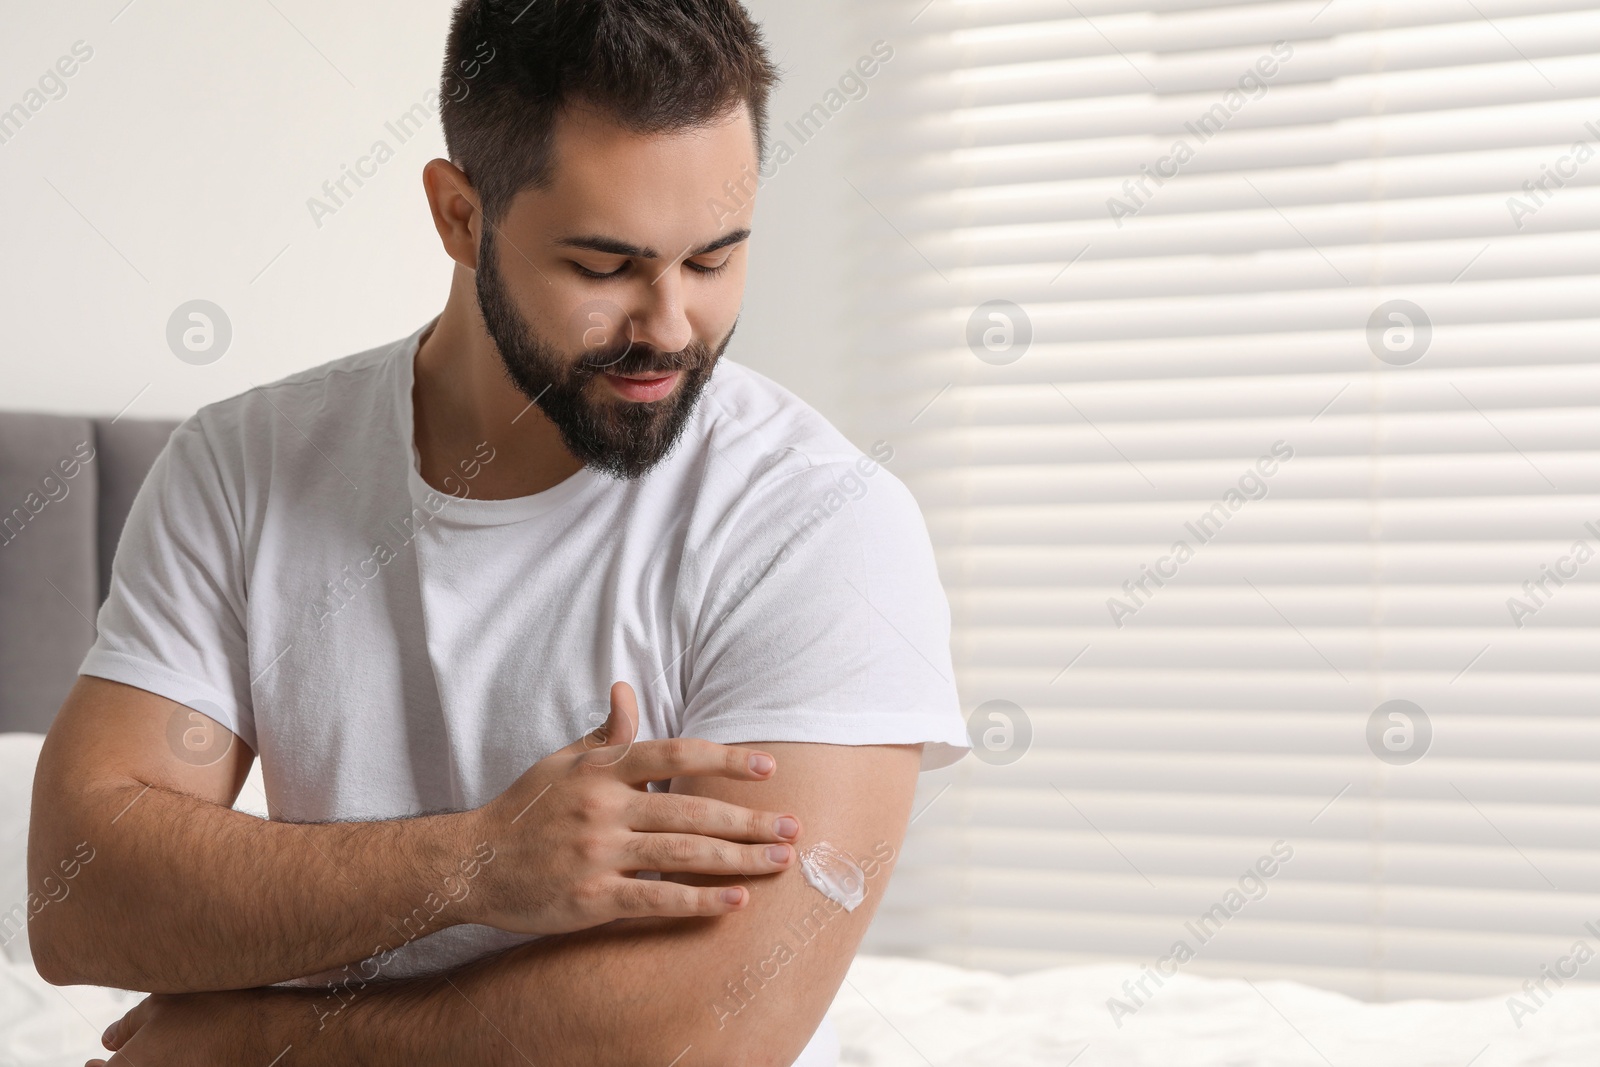 Photo of Man with dry skin applying cream onto his arm indoors, space for text